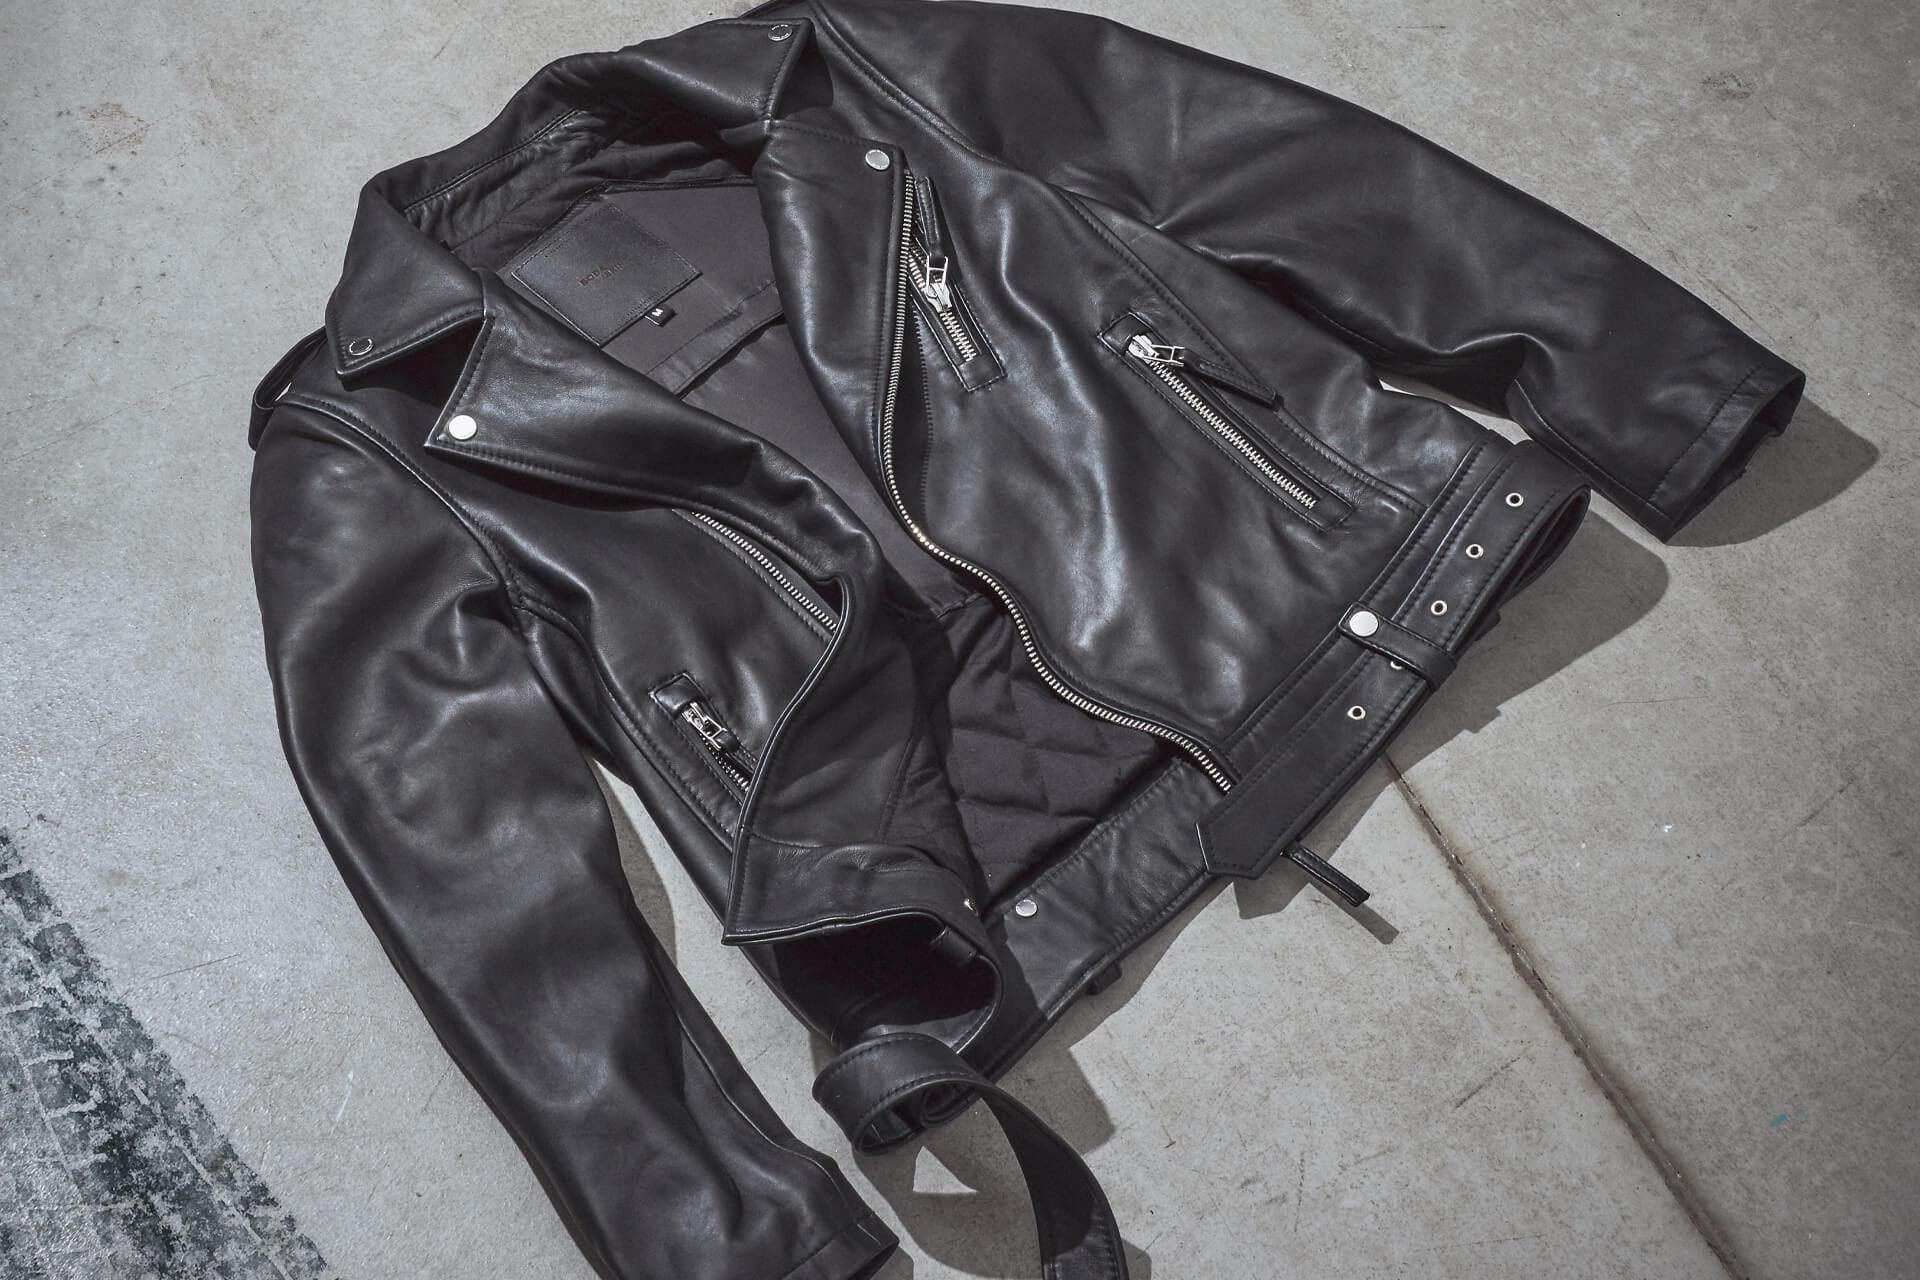 The Boda Skin's 'Voyager' leather motorcycle jacket